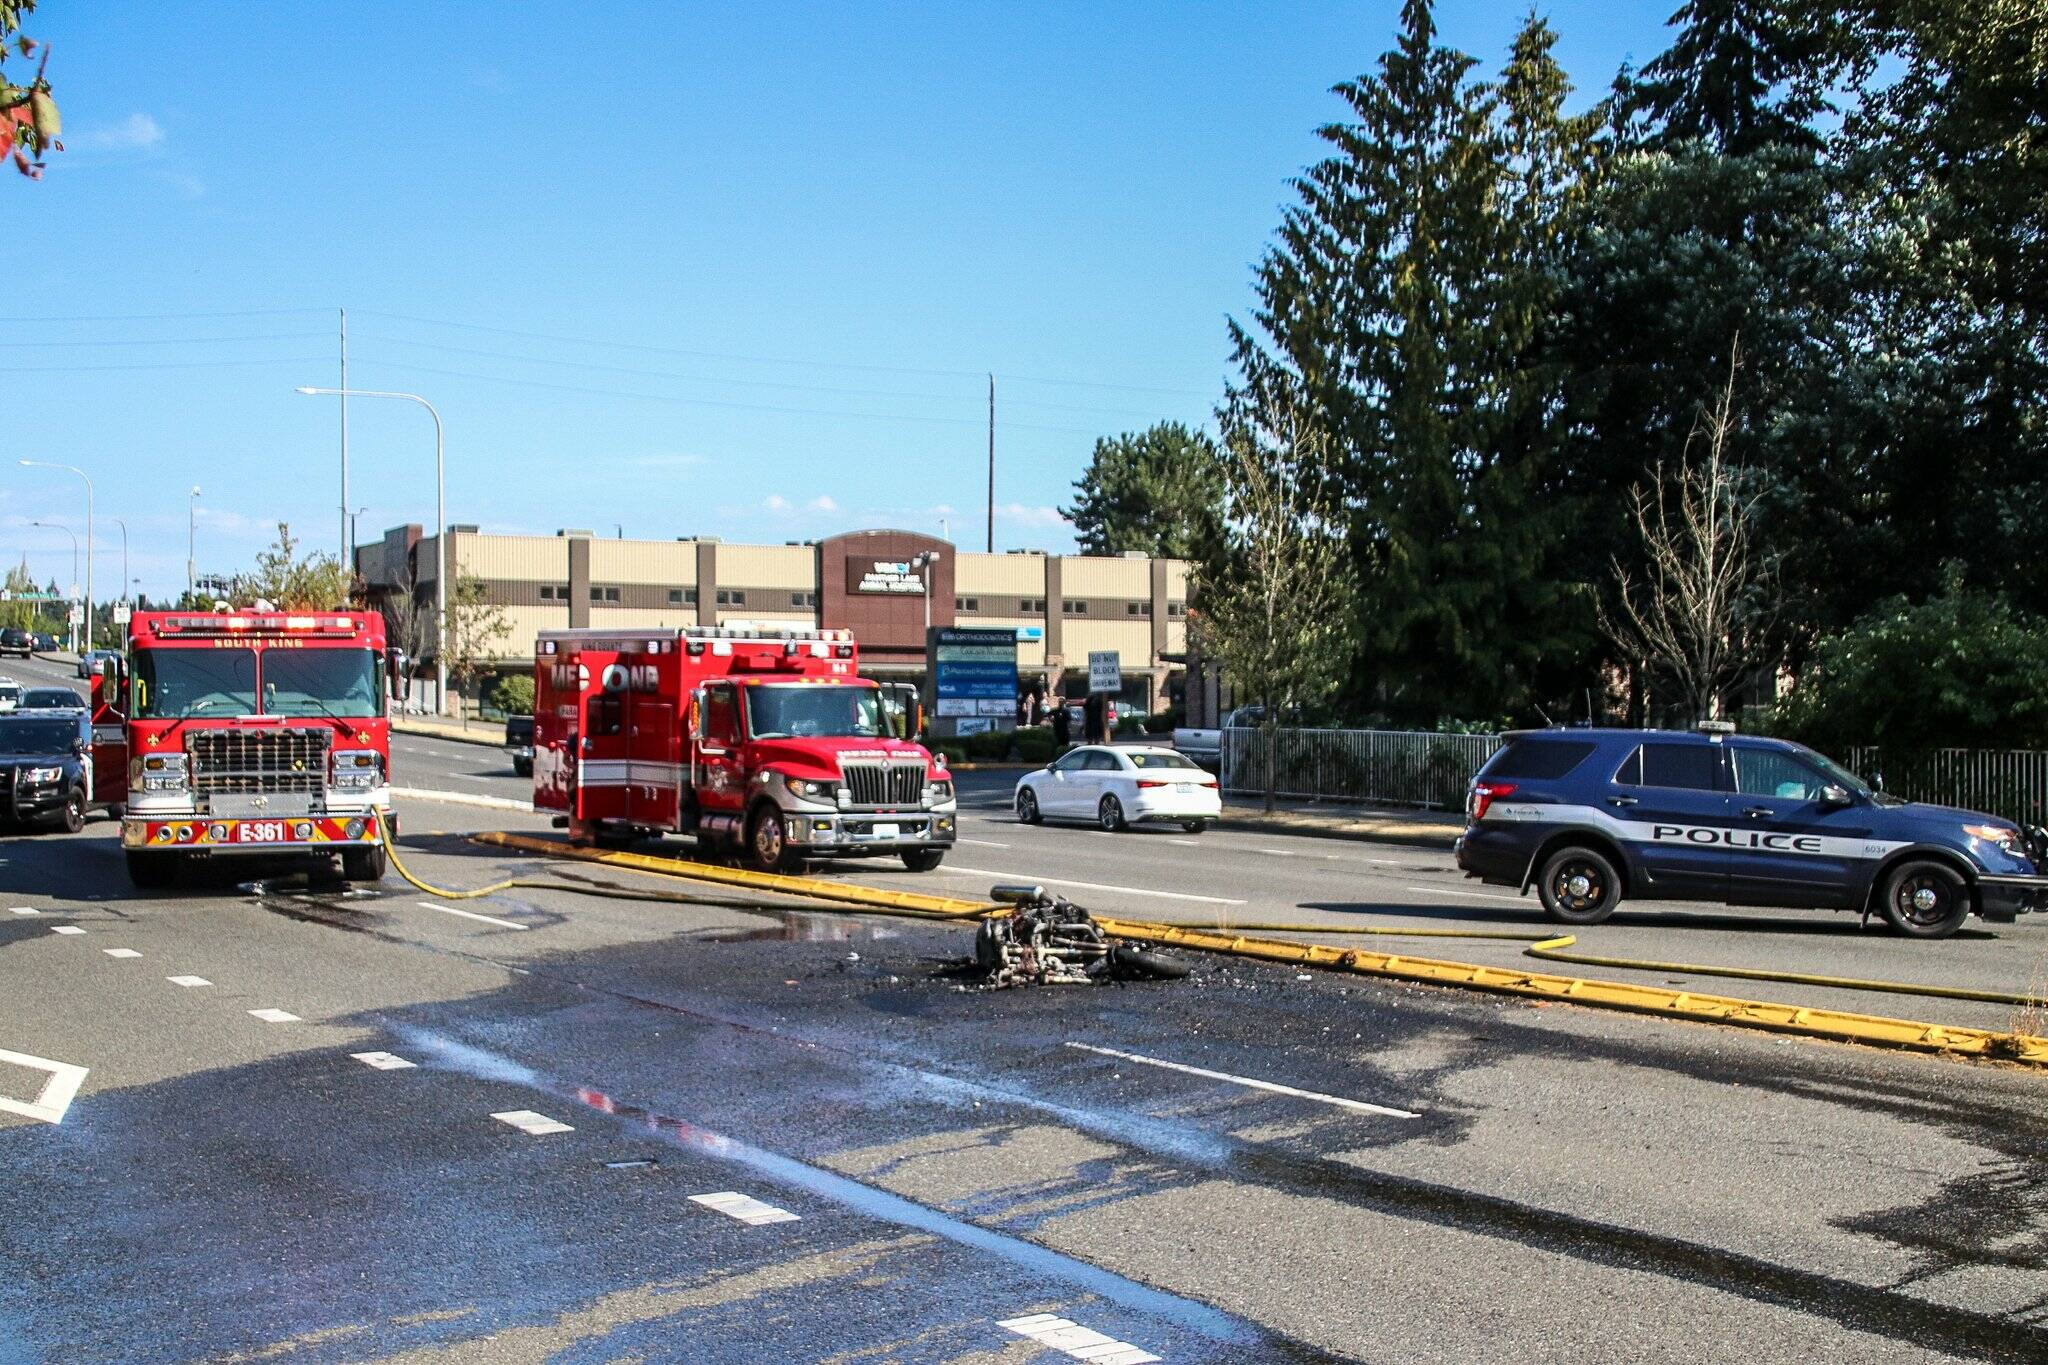 South King Fire and Rescue crews and Federal Way Police responded to a vehicle vs. motorcycle collision along South 348th Street in Federal Way on Aug. 23. Photo courtesy of Josh Hoffman